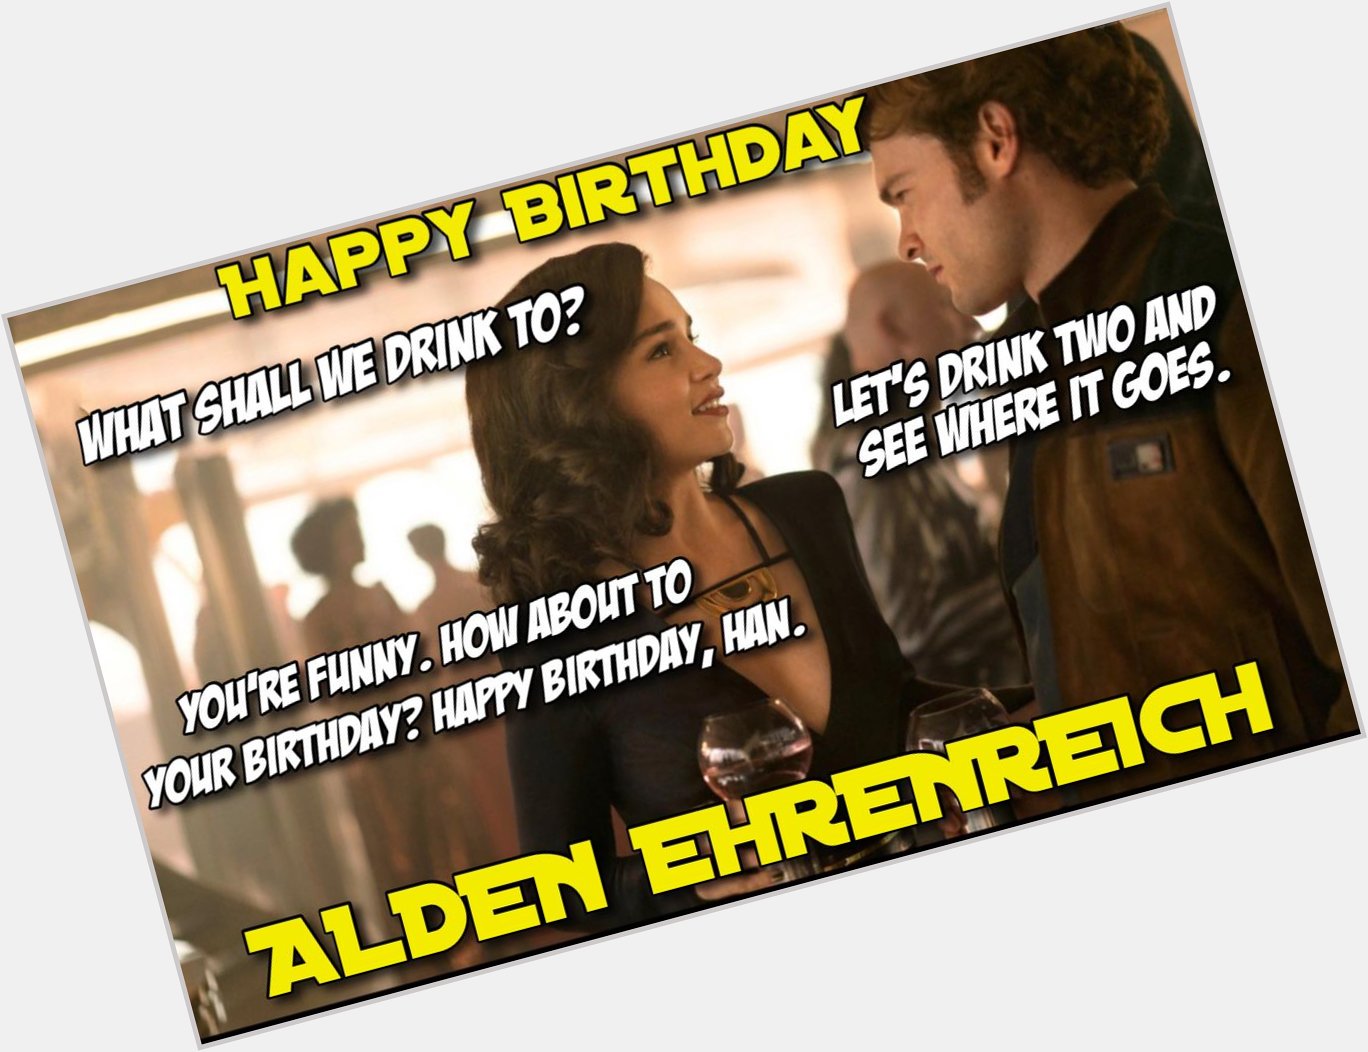 Happy to Alden Ehrenreich! What was your favorite moment from the movie? 